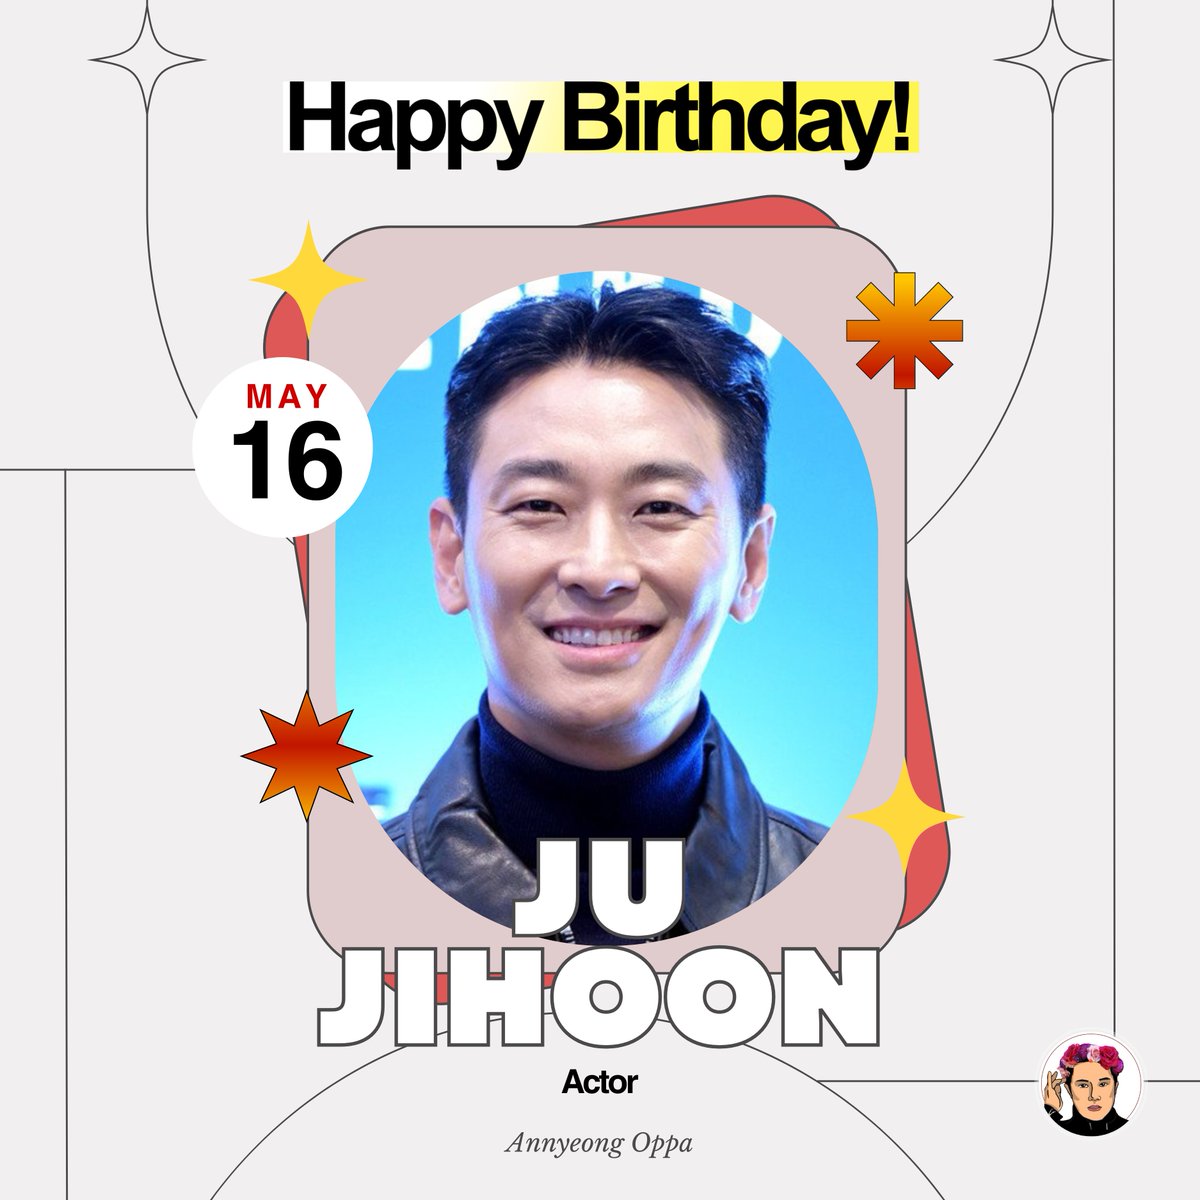 Today is Ju Jihoon’s special day! 🥳 Happiest birthday to the talented Ju Jihoon! May your day be blessed and filled with happiness and joy! ❤️🎉 Check out one of his dramas here: annyeongoppa.com/2024/04/25/5-r… #HappyJuJihoonDay